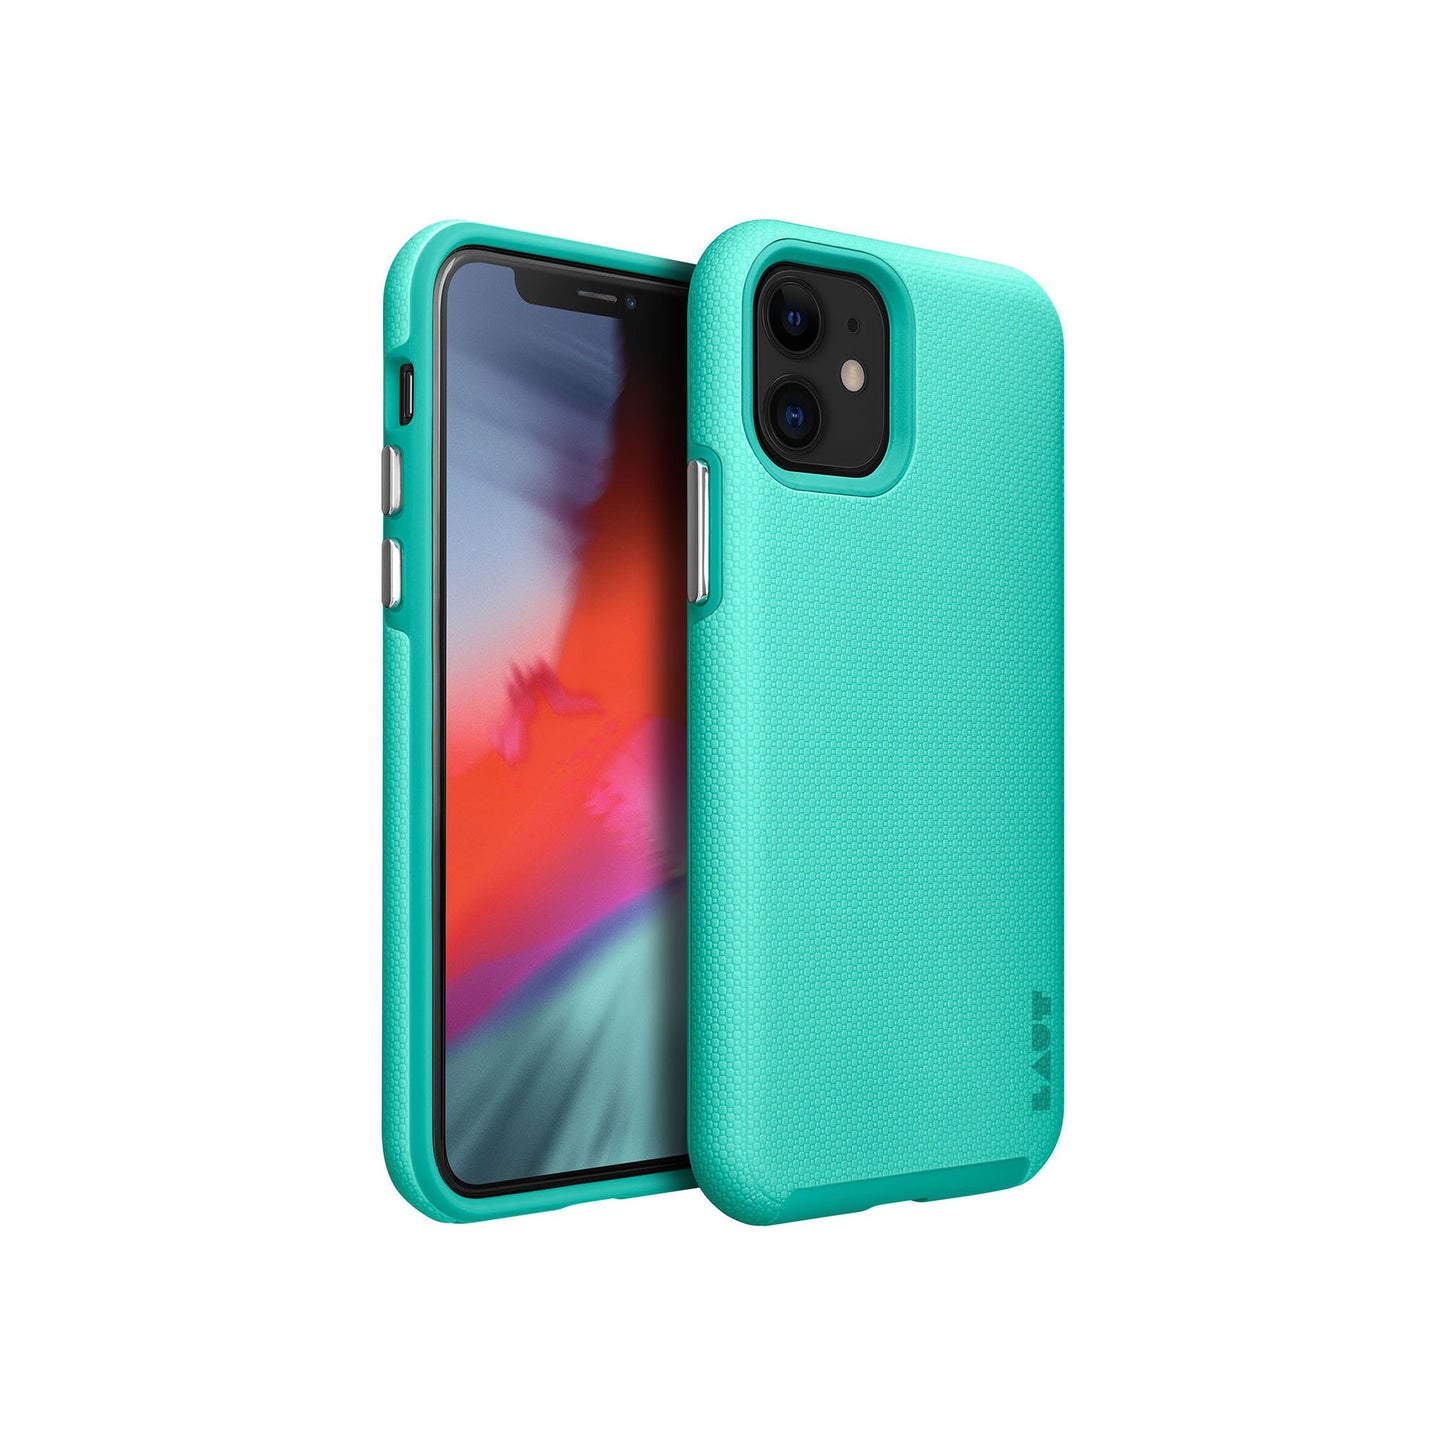 LAUT Shield for iPhone 11 - Mint